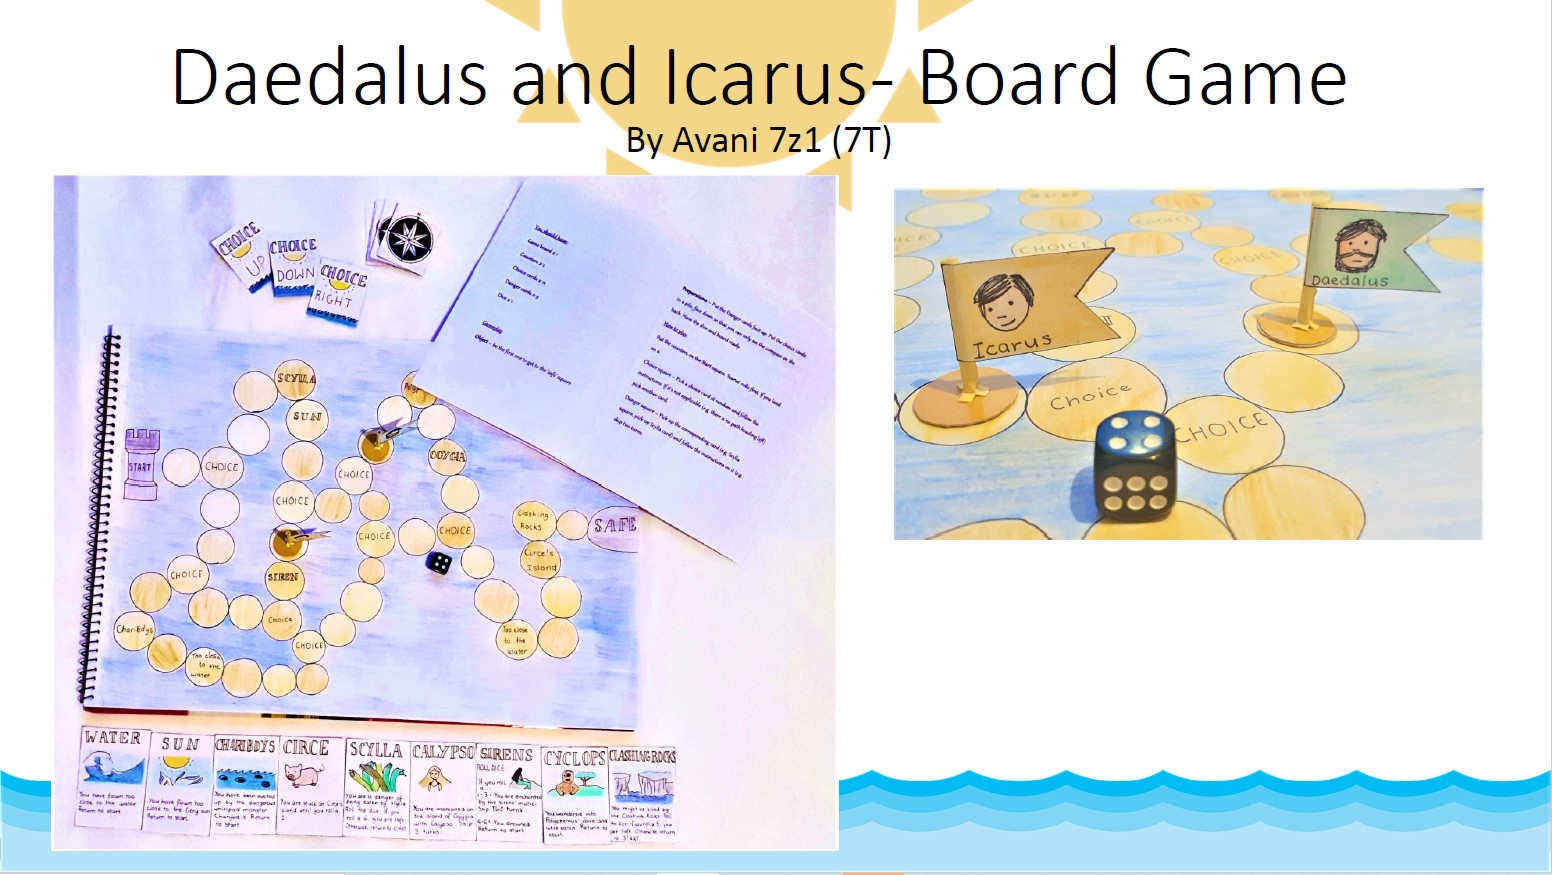 An image of components of a board game playing out the fate of Daedalus and Icarus.